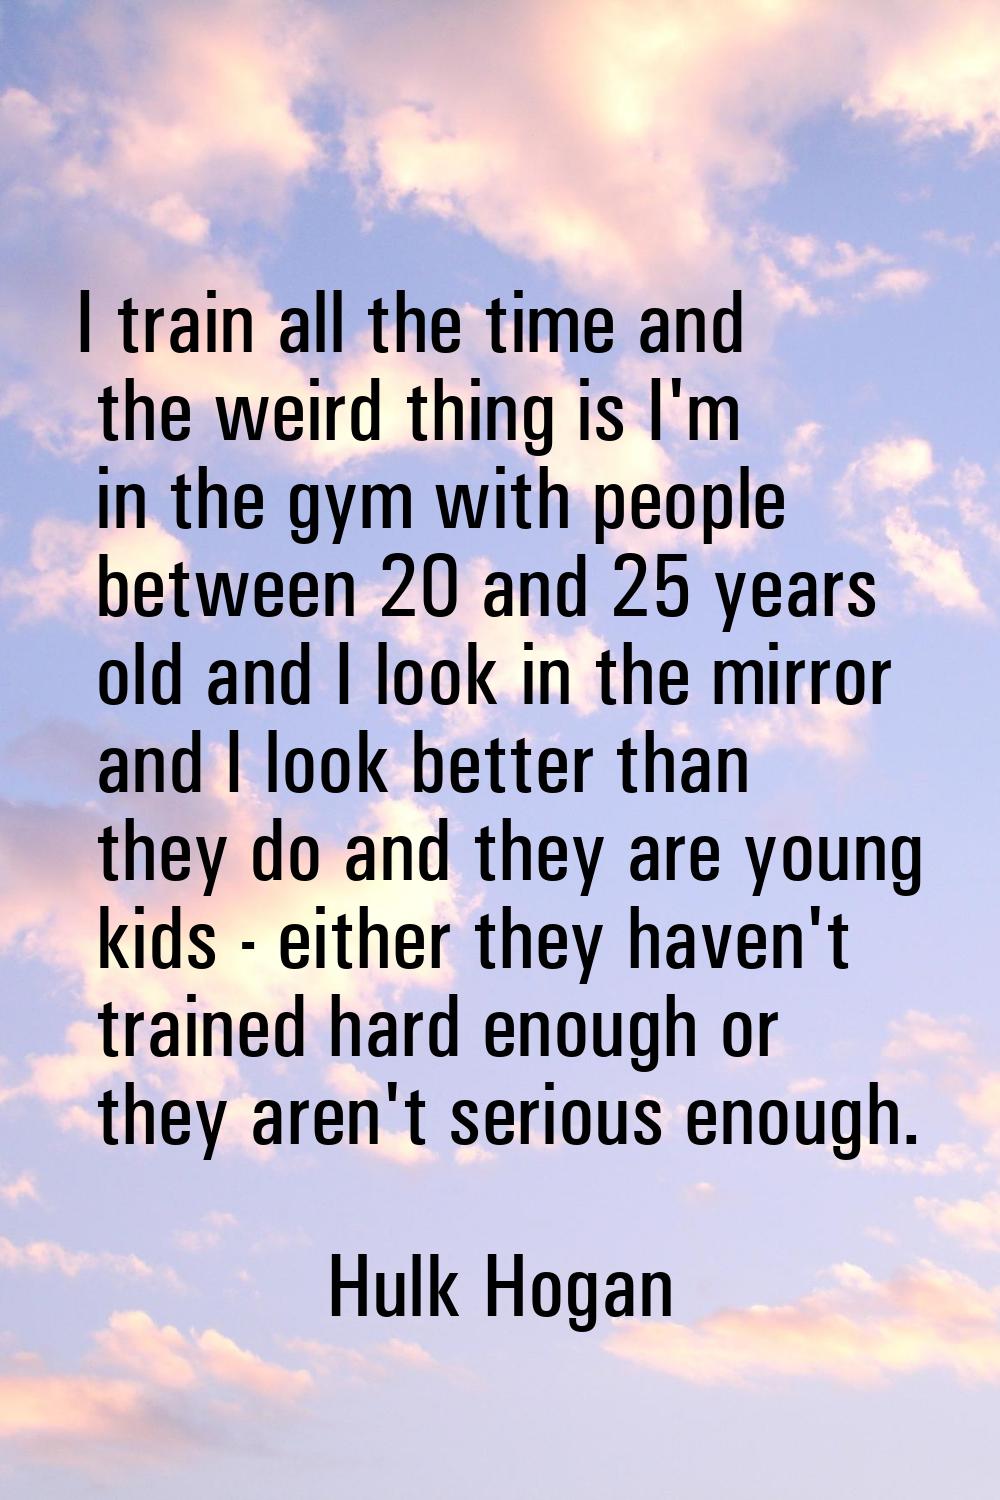 I train all the time and the weird thing is I'm in the gym with people between 20 and 25 years old 